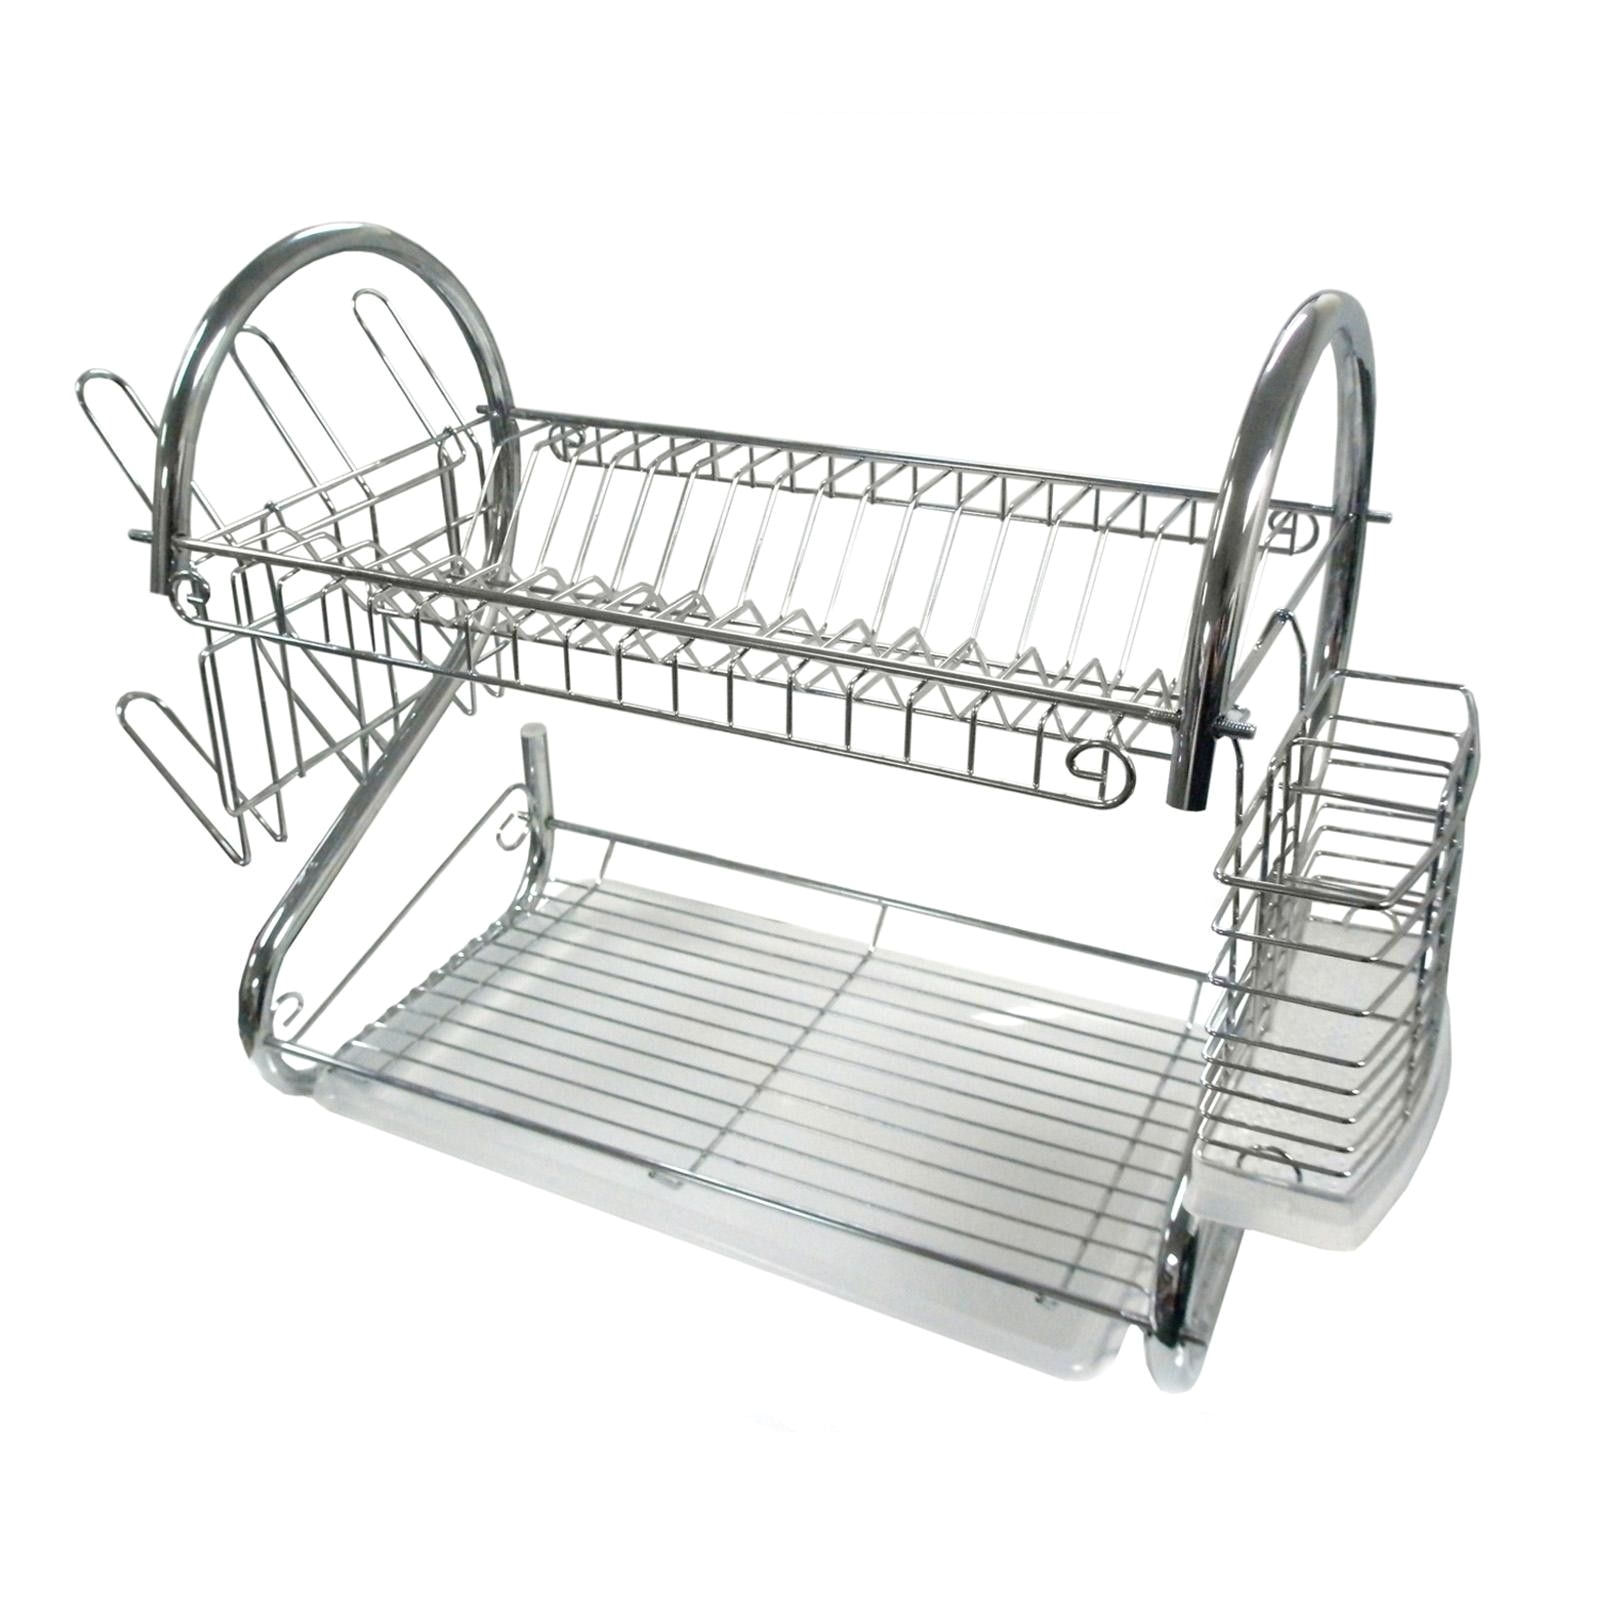 Extra Large Dish Rack and Drainboard Pin by Awesome Sauce Gifts On Gadgets and Gifts Pinterest Dish